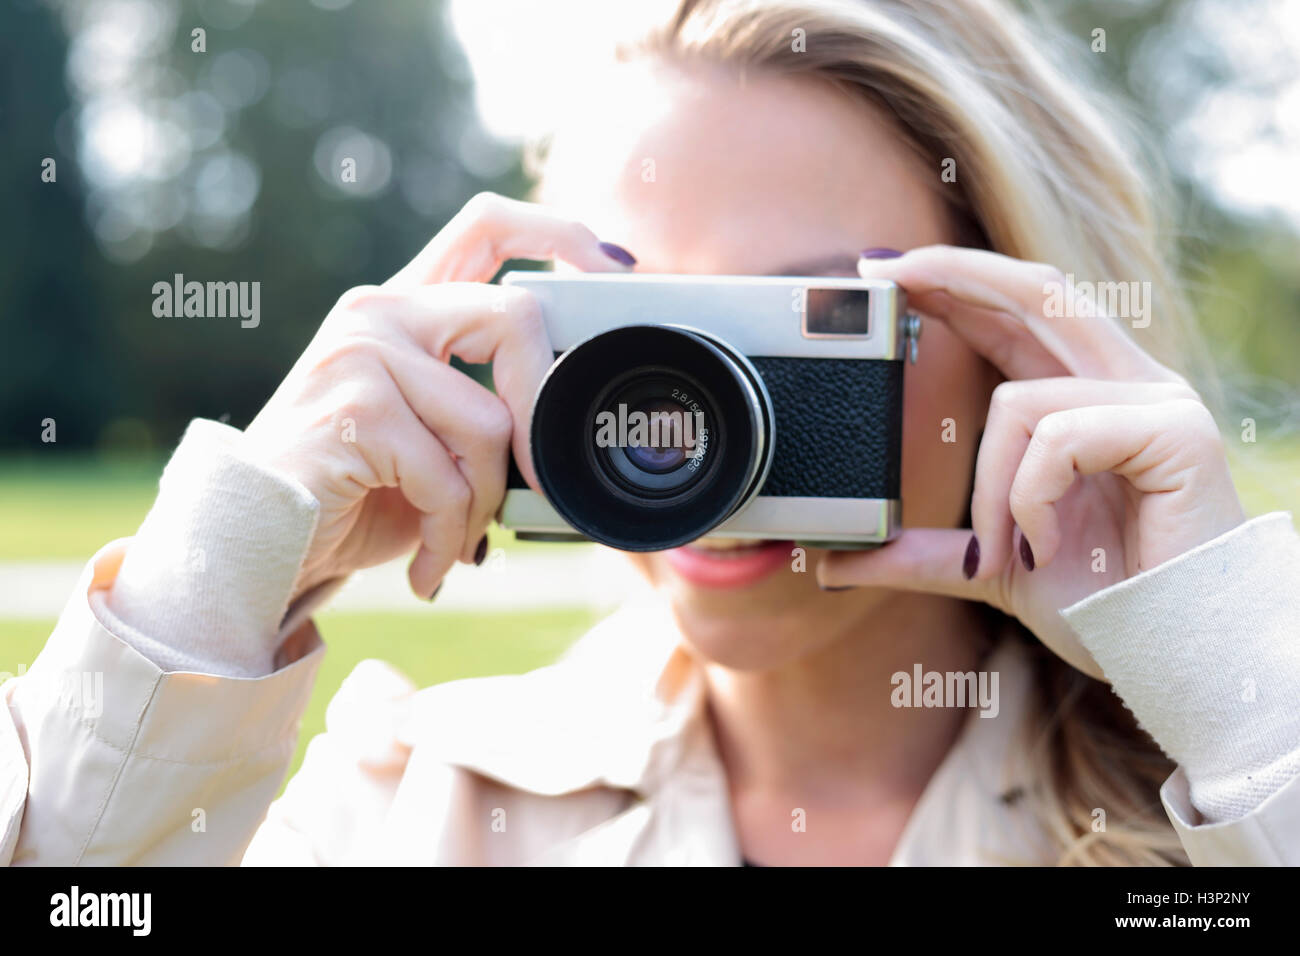 Young woman taking photo with old foto camera Stock Photo